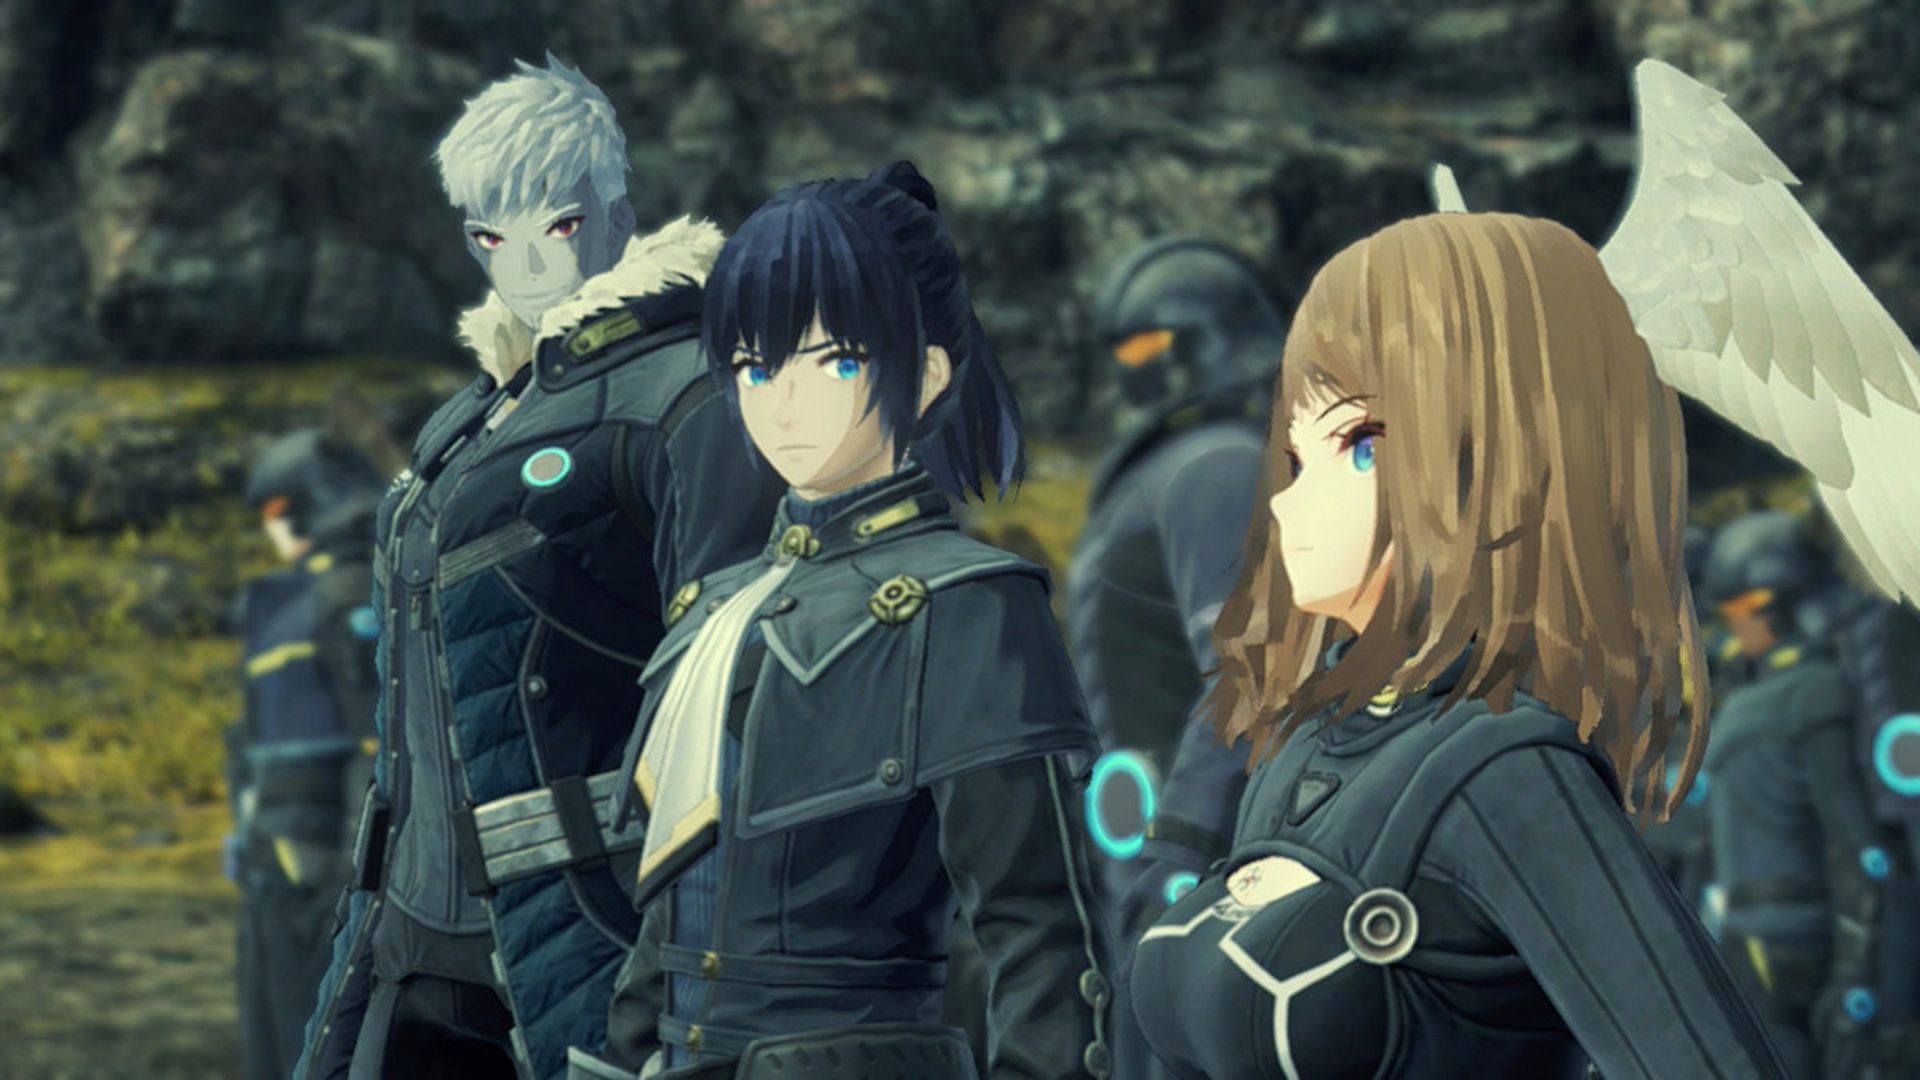 Today, we are going to be covering is Xenoblade Chronicles 3 a sequel, is Xenoblade Chronicles 3 the final game, and the Xenoblade Chronicles 3 trailer.